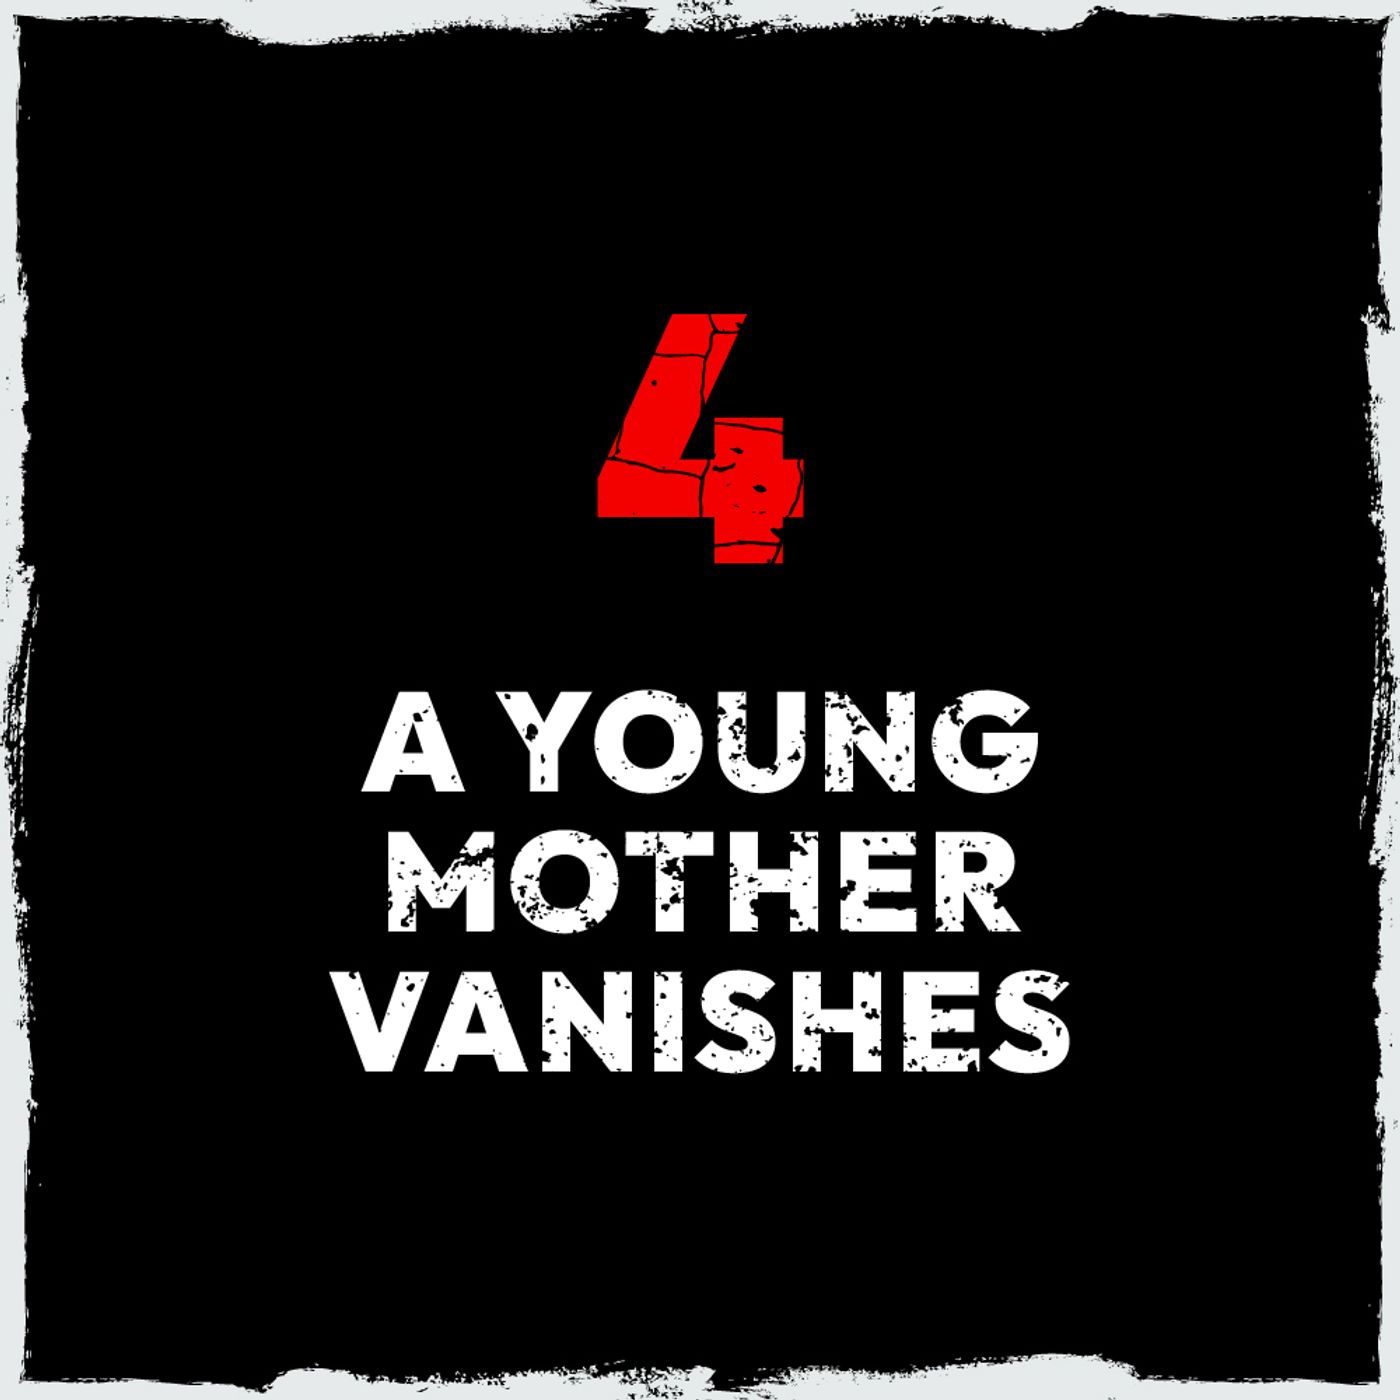 4: Episode 4: A young mother vanishes